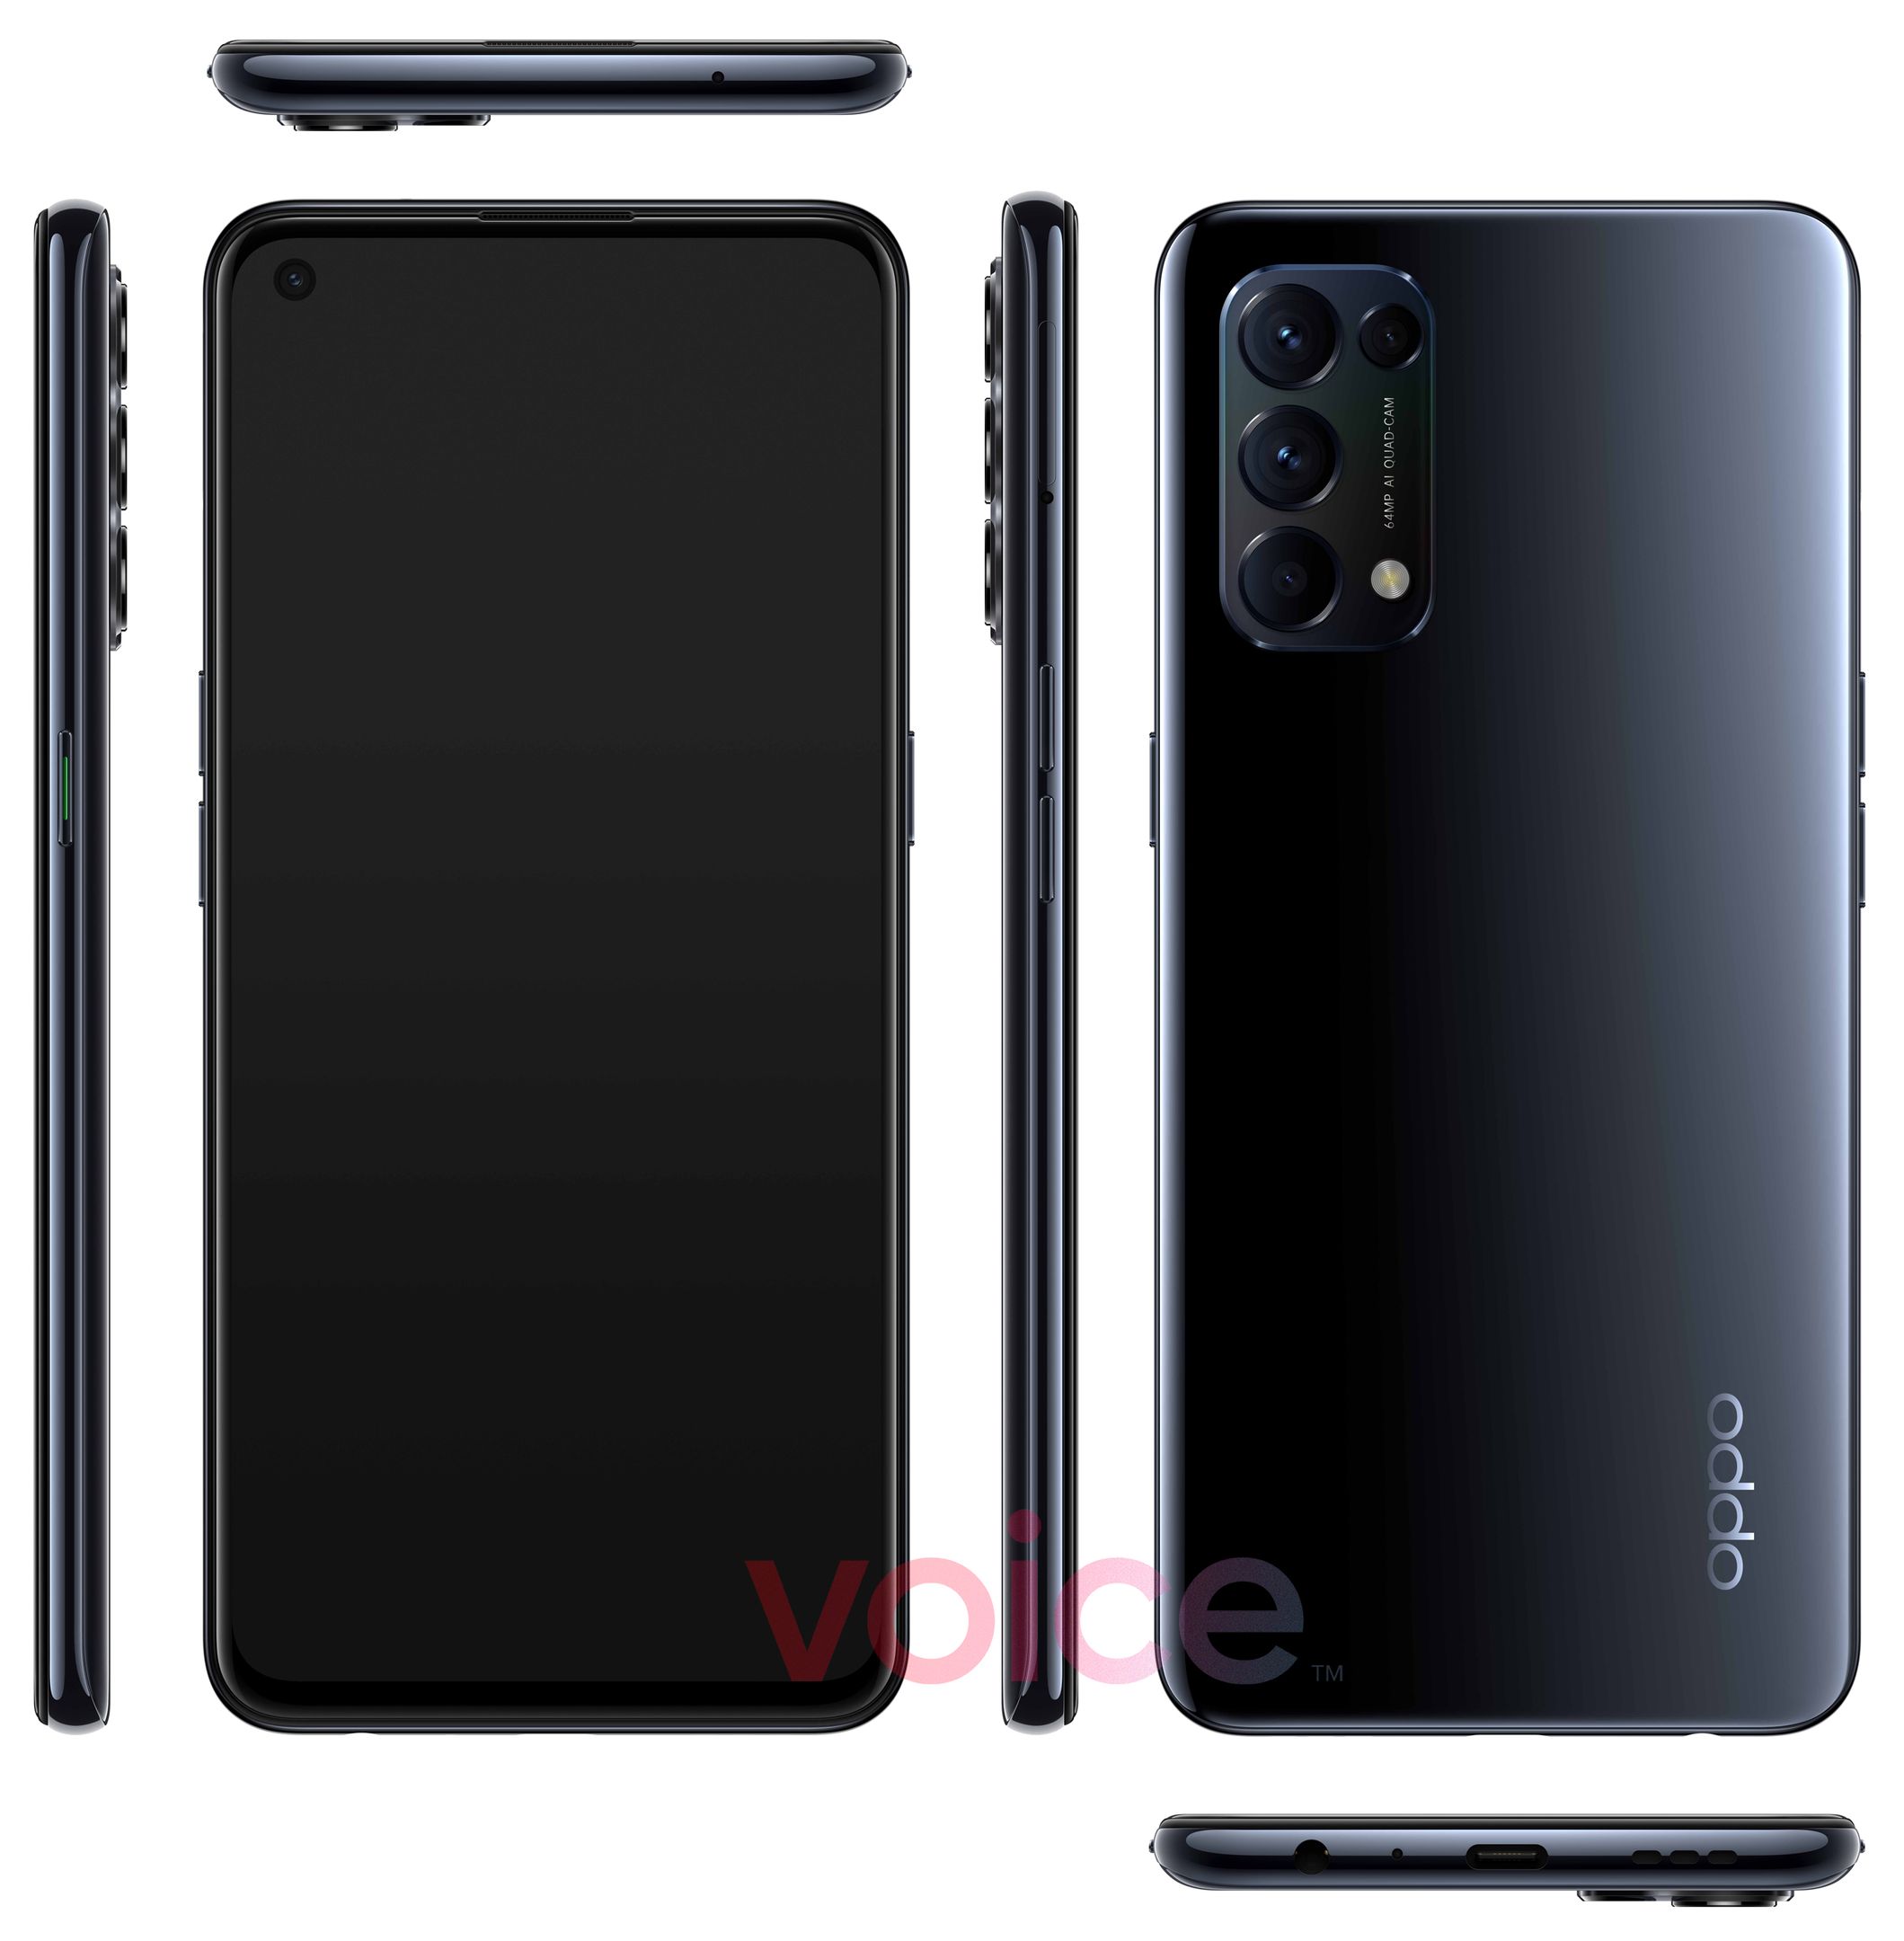 2a78e57b7f5cc9b6fc8073d395b216cfedd3bc70779c4acef193f98d73e40ba9 Oppo Find X3 Lite live image leaked ahead of launch